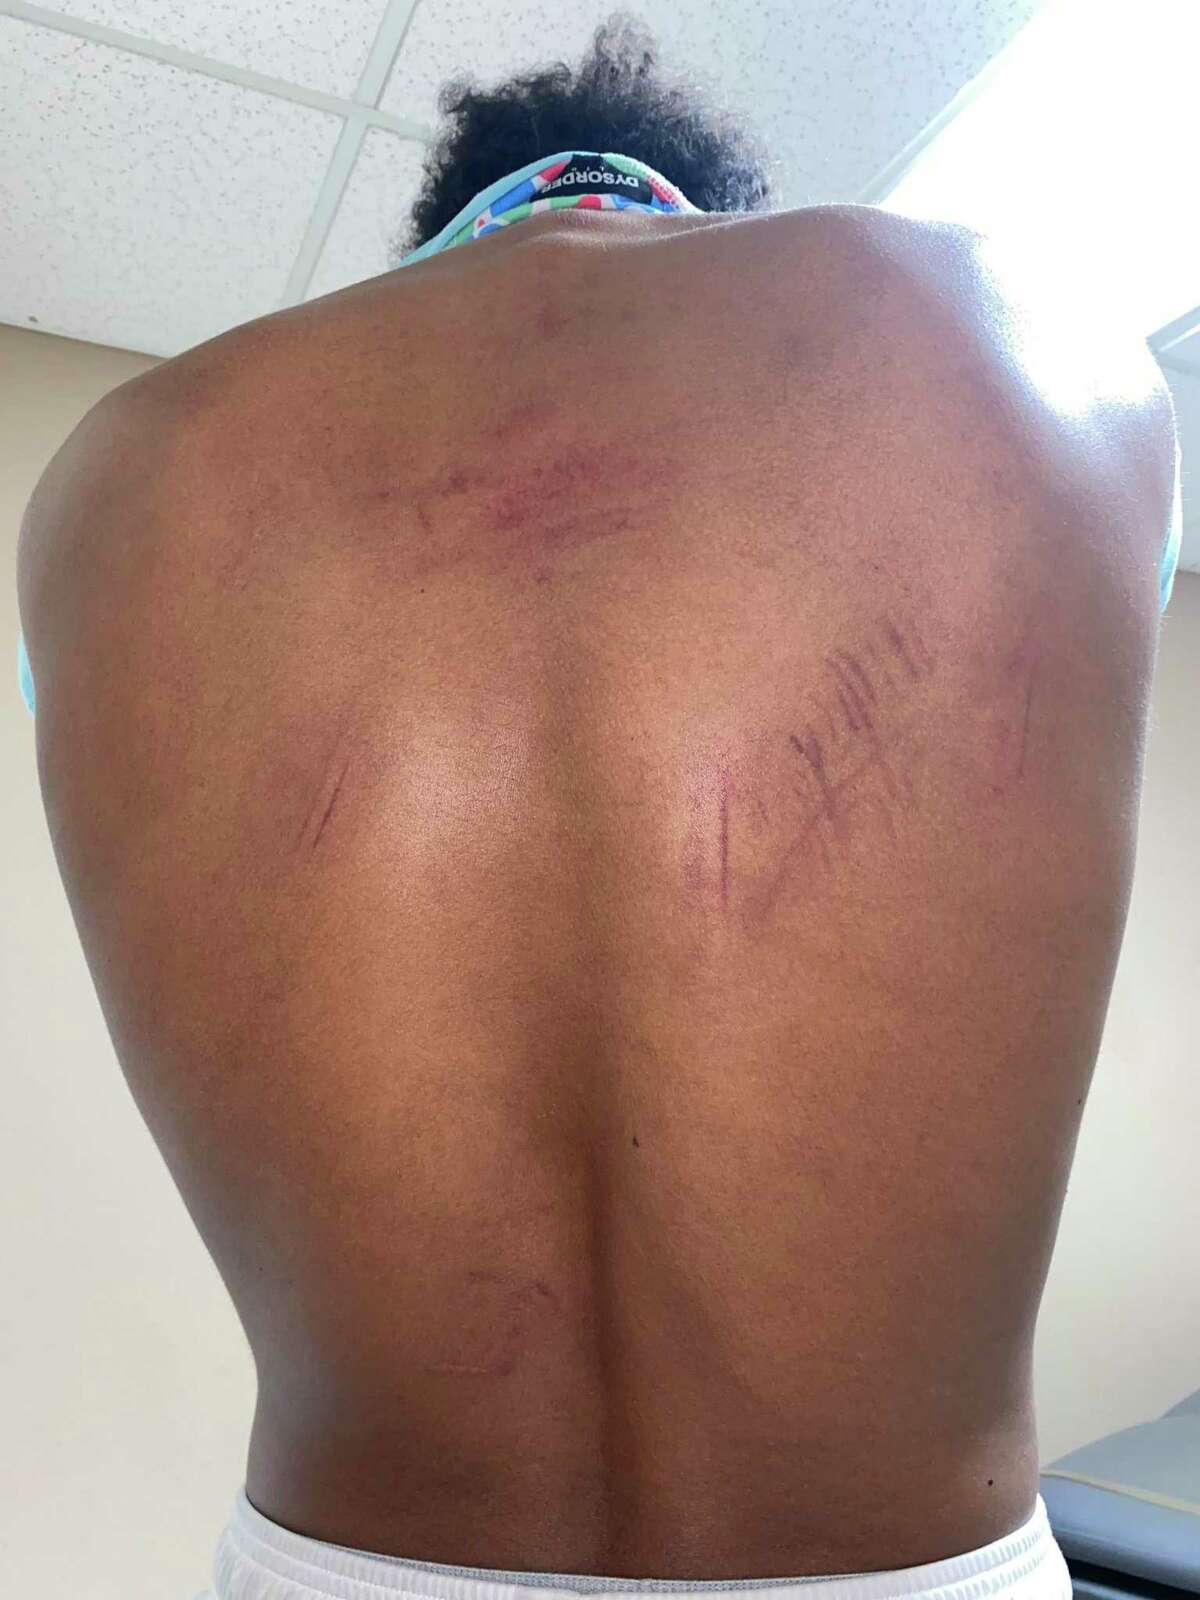 Devin Carter with bruises on his back after four Stockton police officers allegedly beat him during a traffic stop.